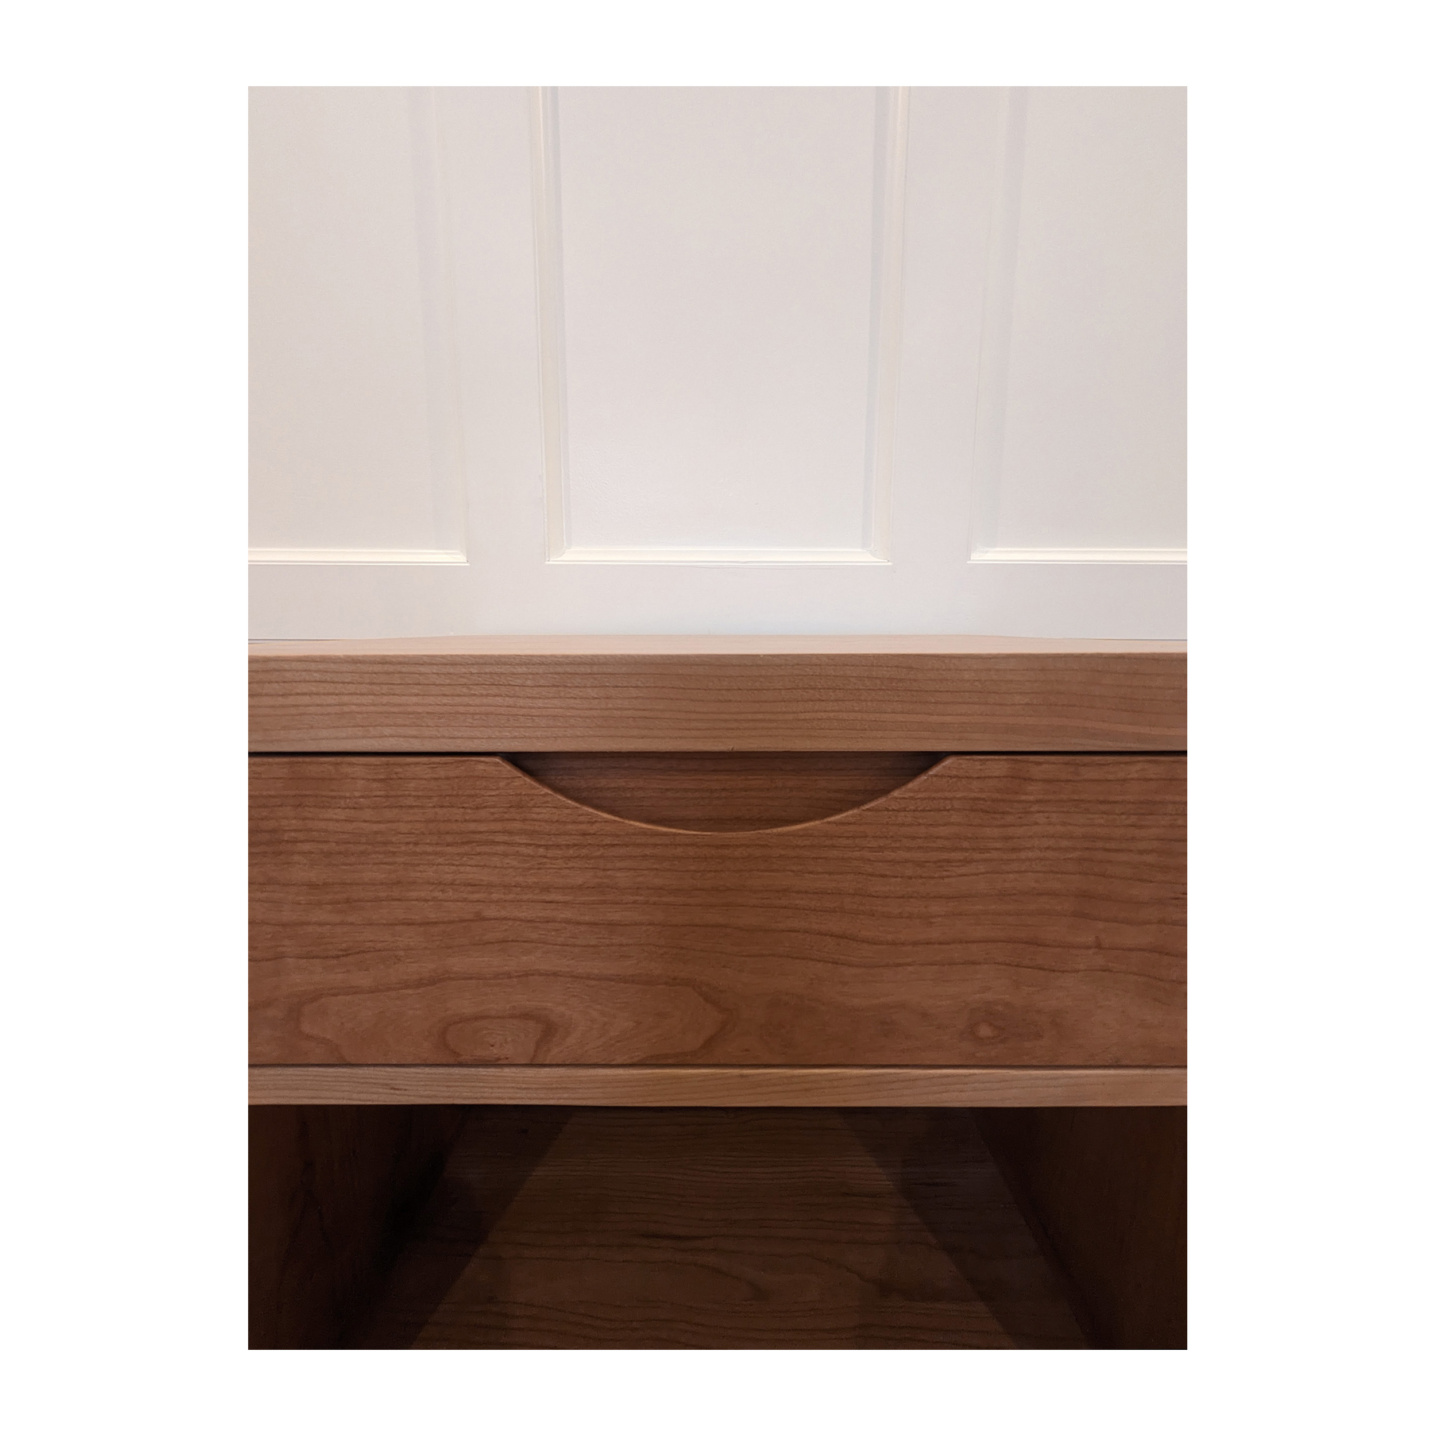 Nightstand handle cut into the solid wood drawer front--Made by 57NorthPlank Tailored Modern Furniture